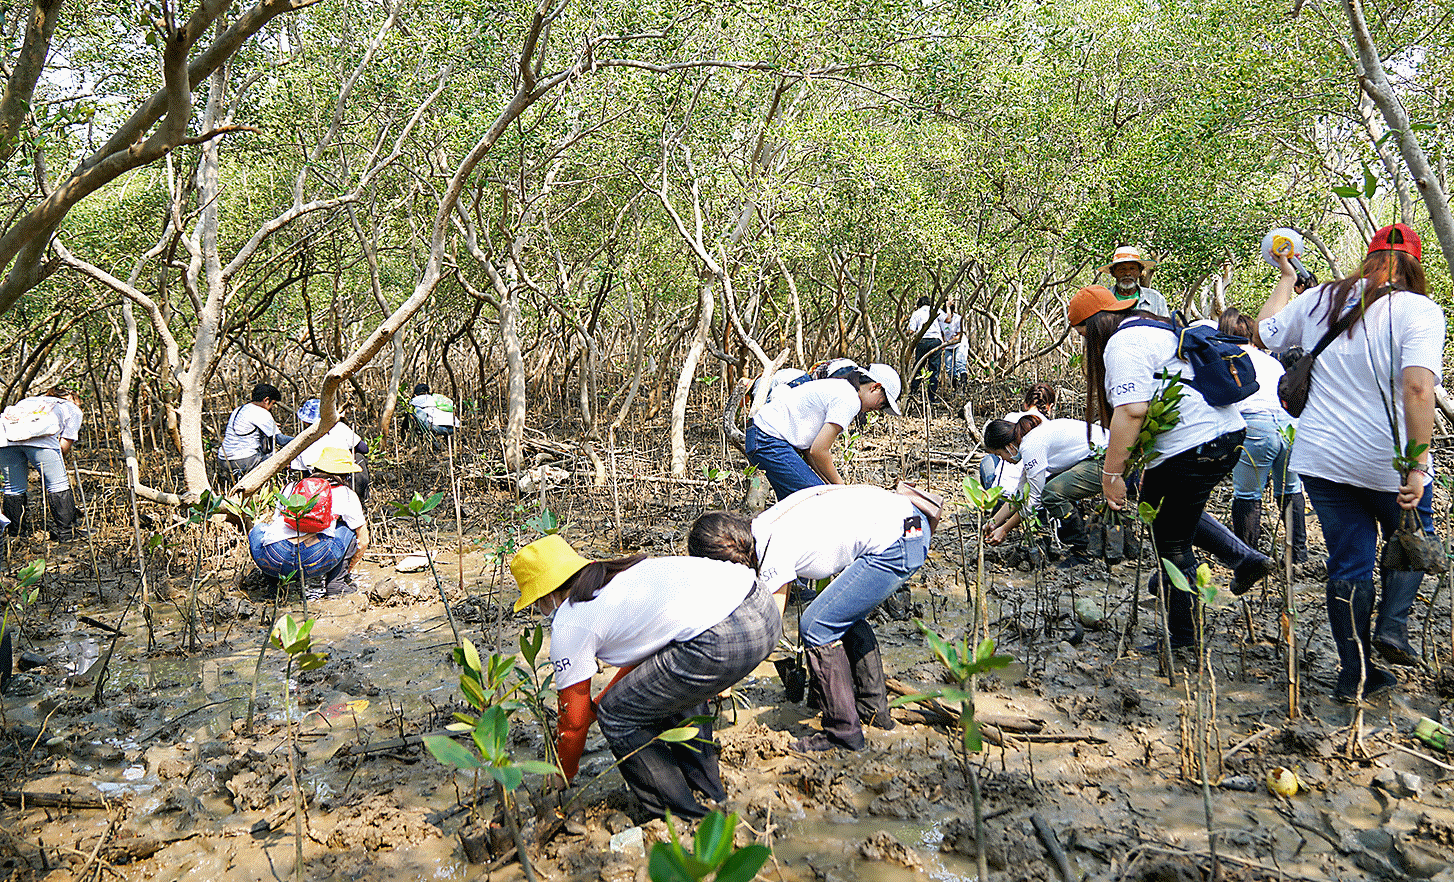 Photograph showing local mangrove tree-planting activities with employees of Thailand site participating